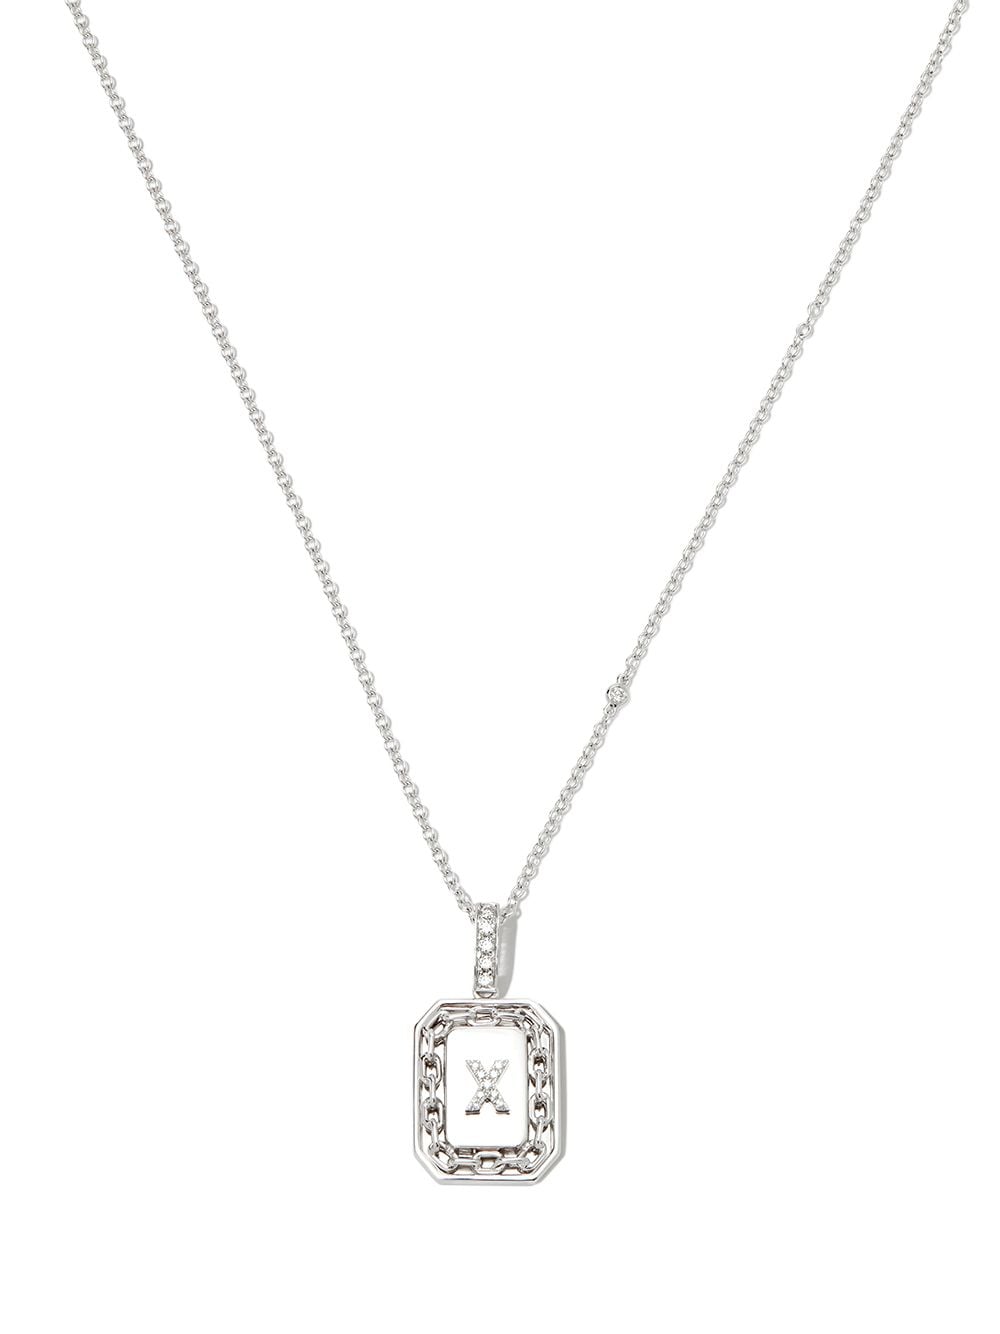 18kt white gold X-initial bead-chain necklace